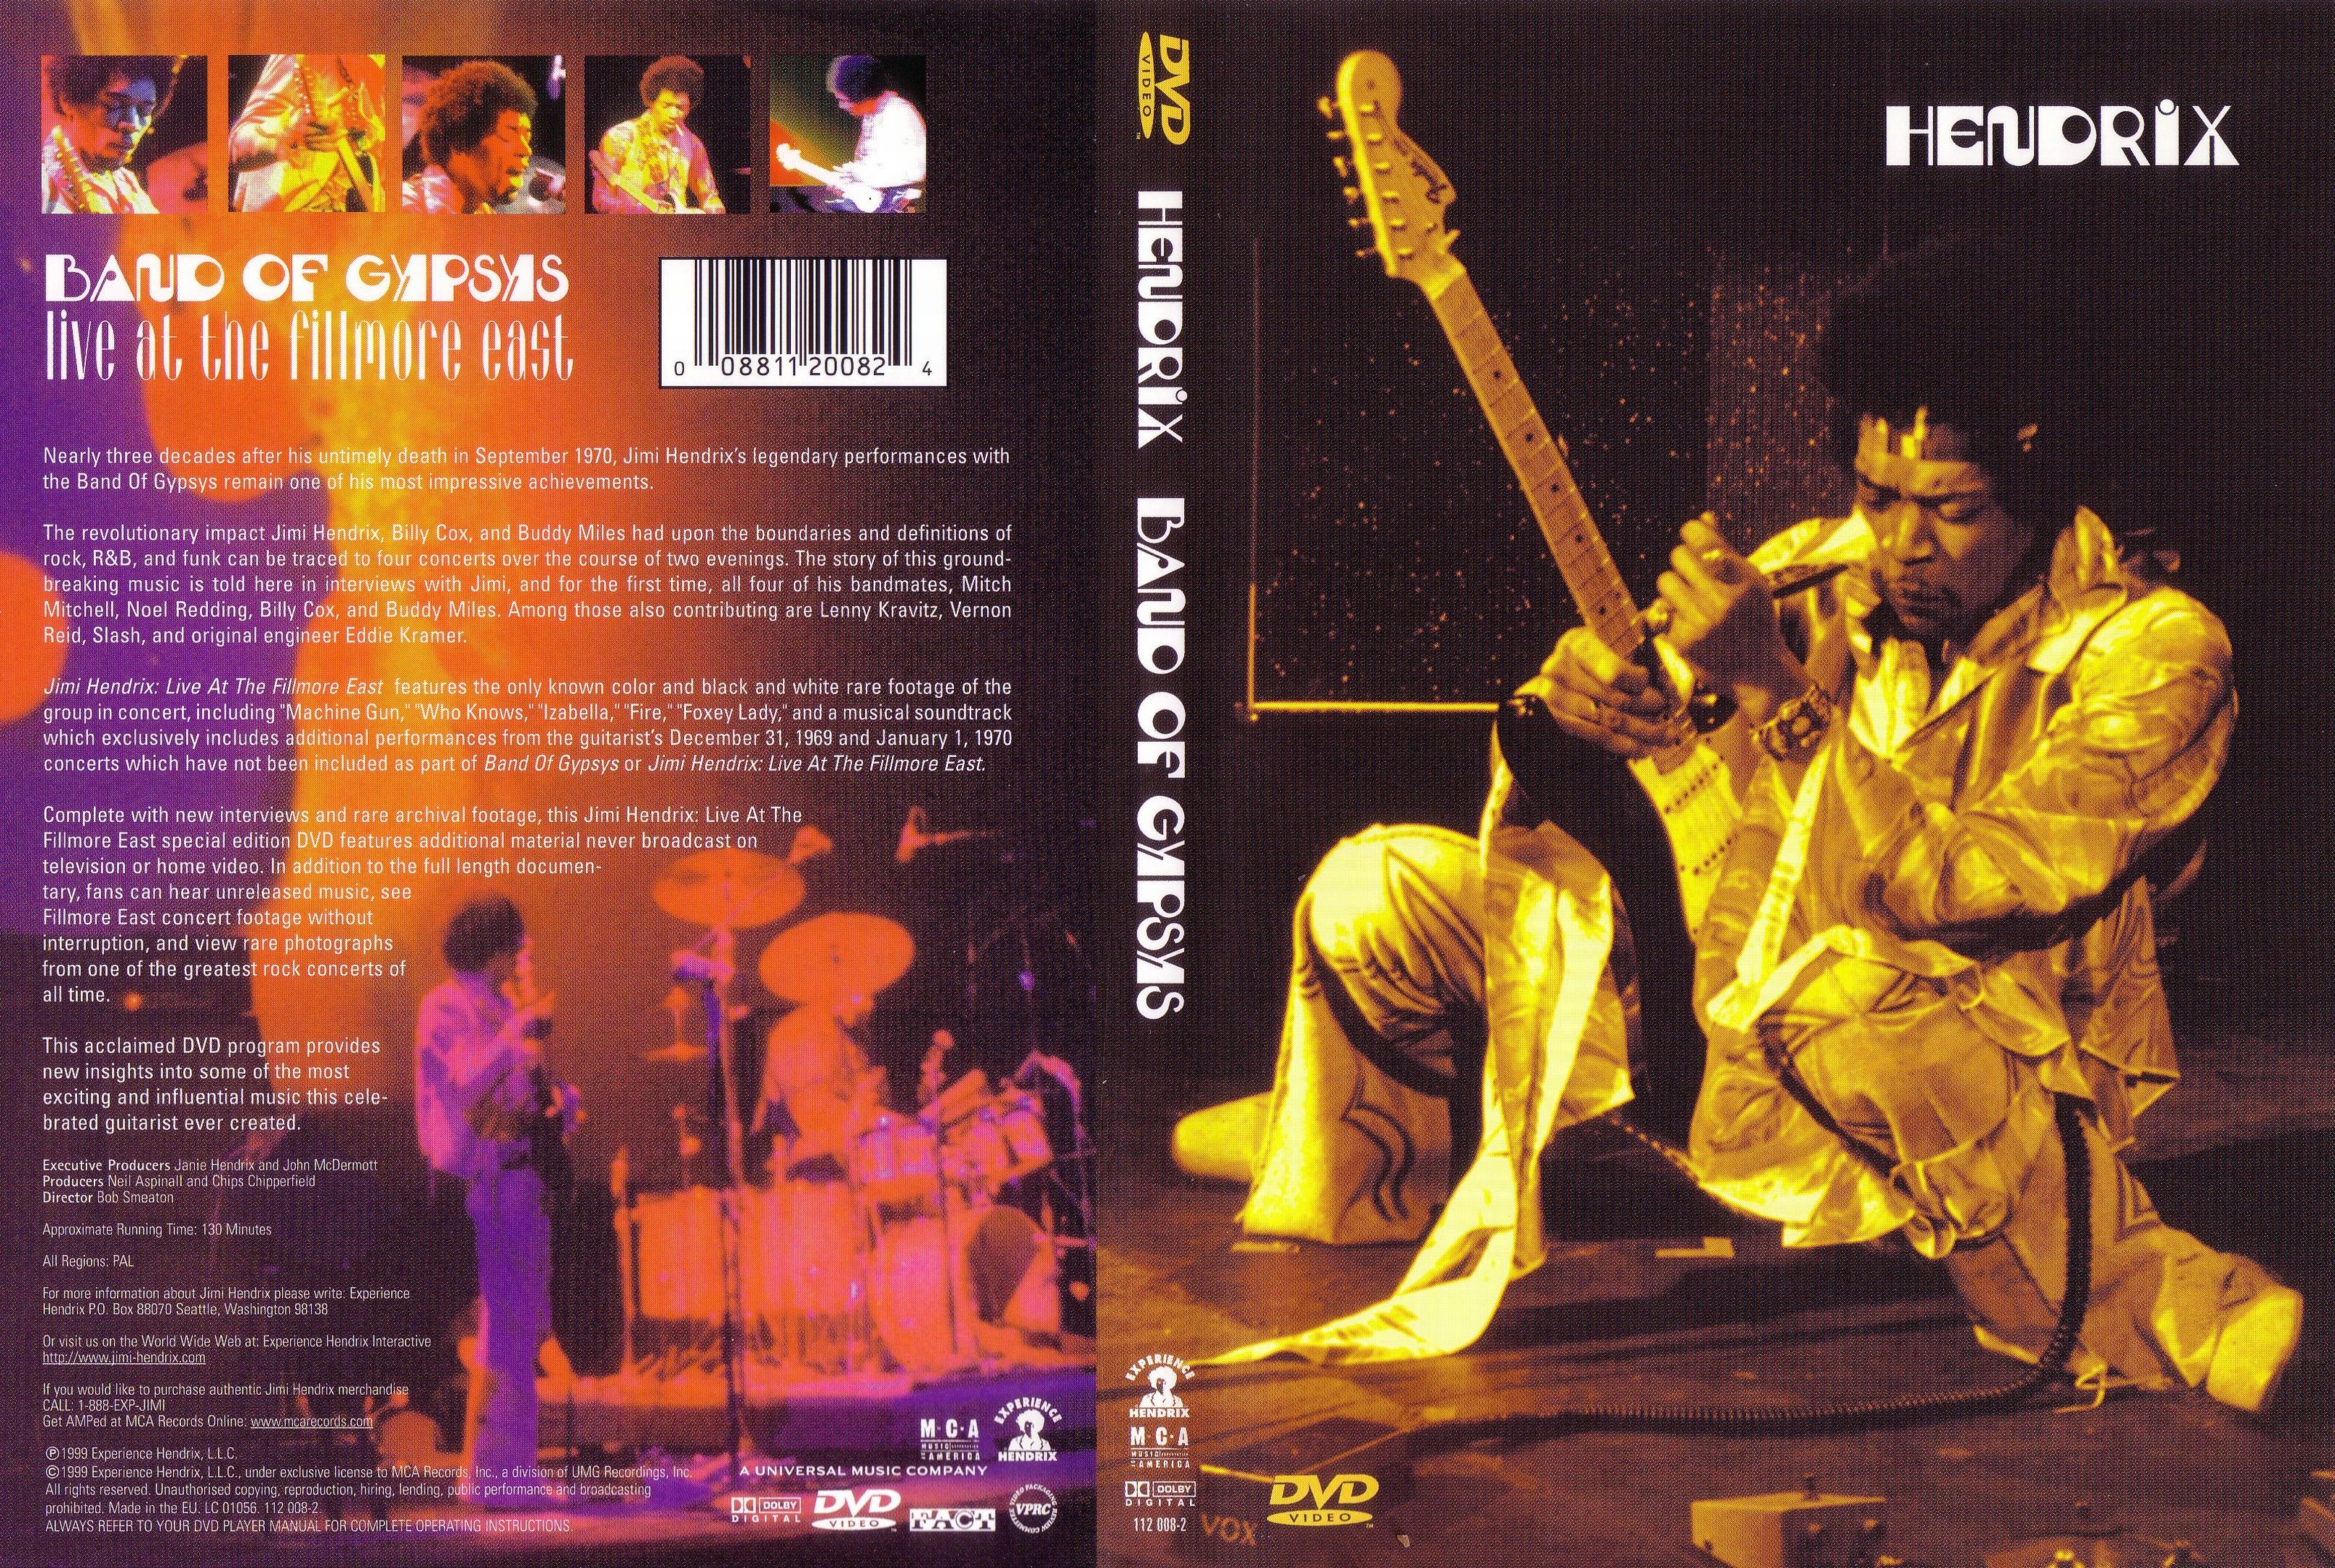 Jaquette DVD Jimi Hendrix Band of Gypsys